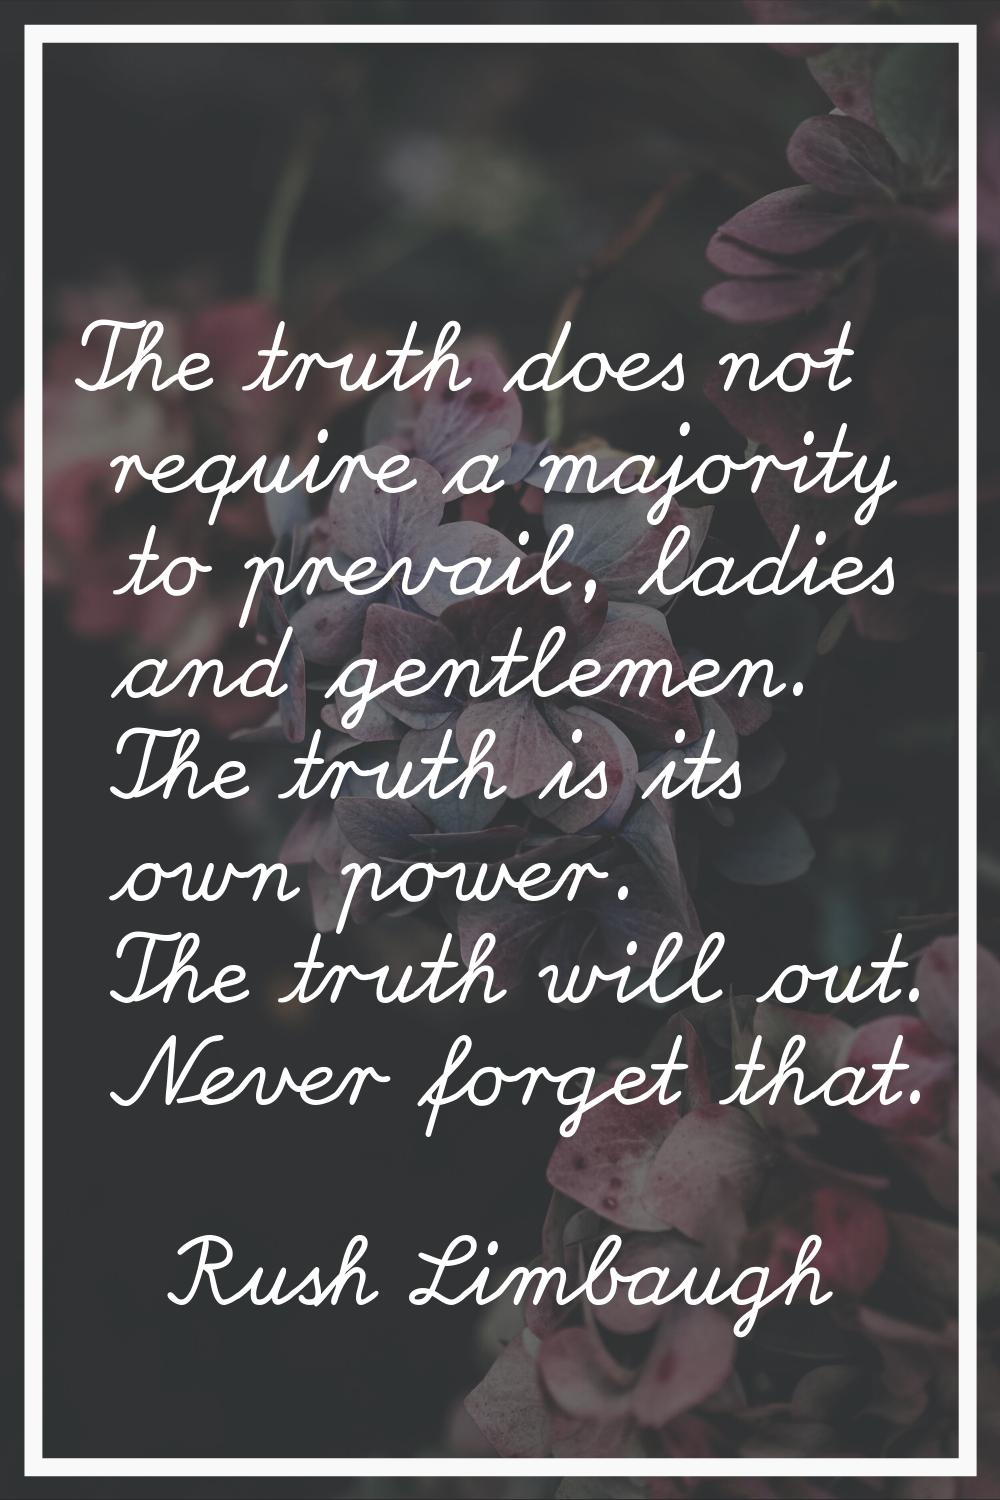 The truth does not require a majority to prevail, ladies and gentlemen. The truth is its own power.